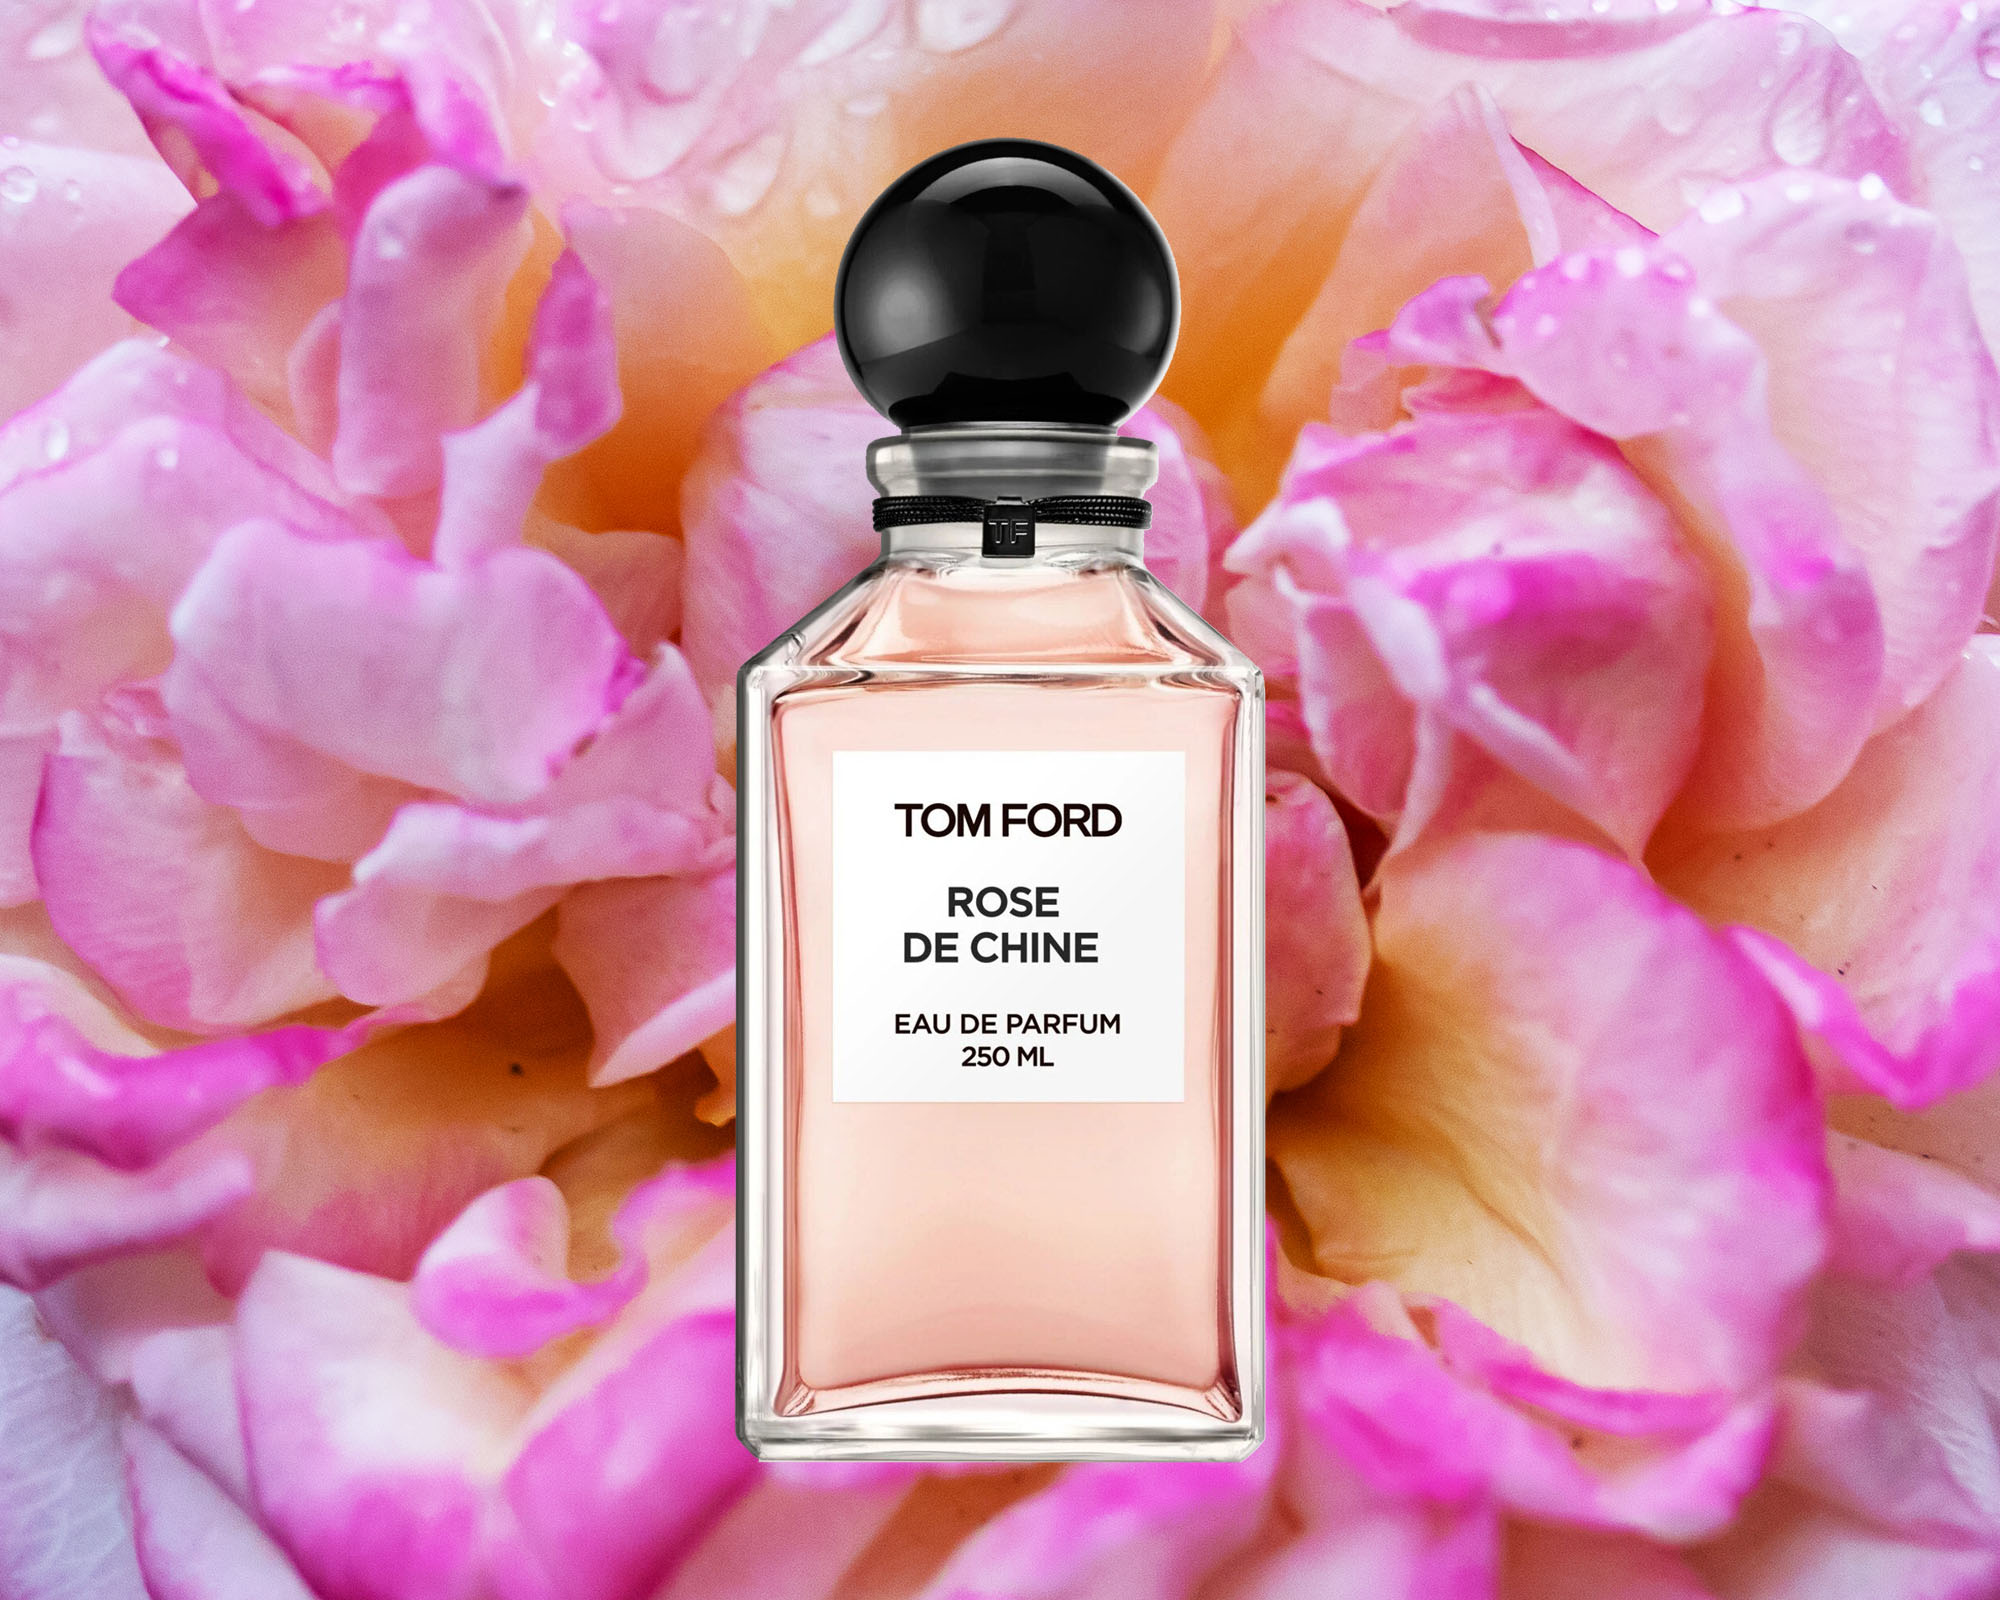 Experience Tom Ford Private Rose Garden fragrances in a